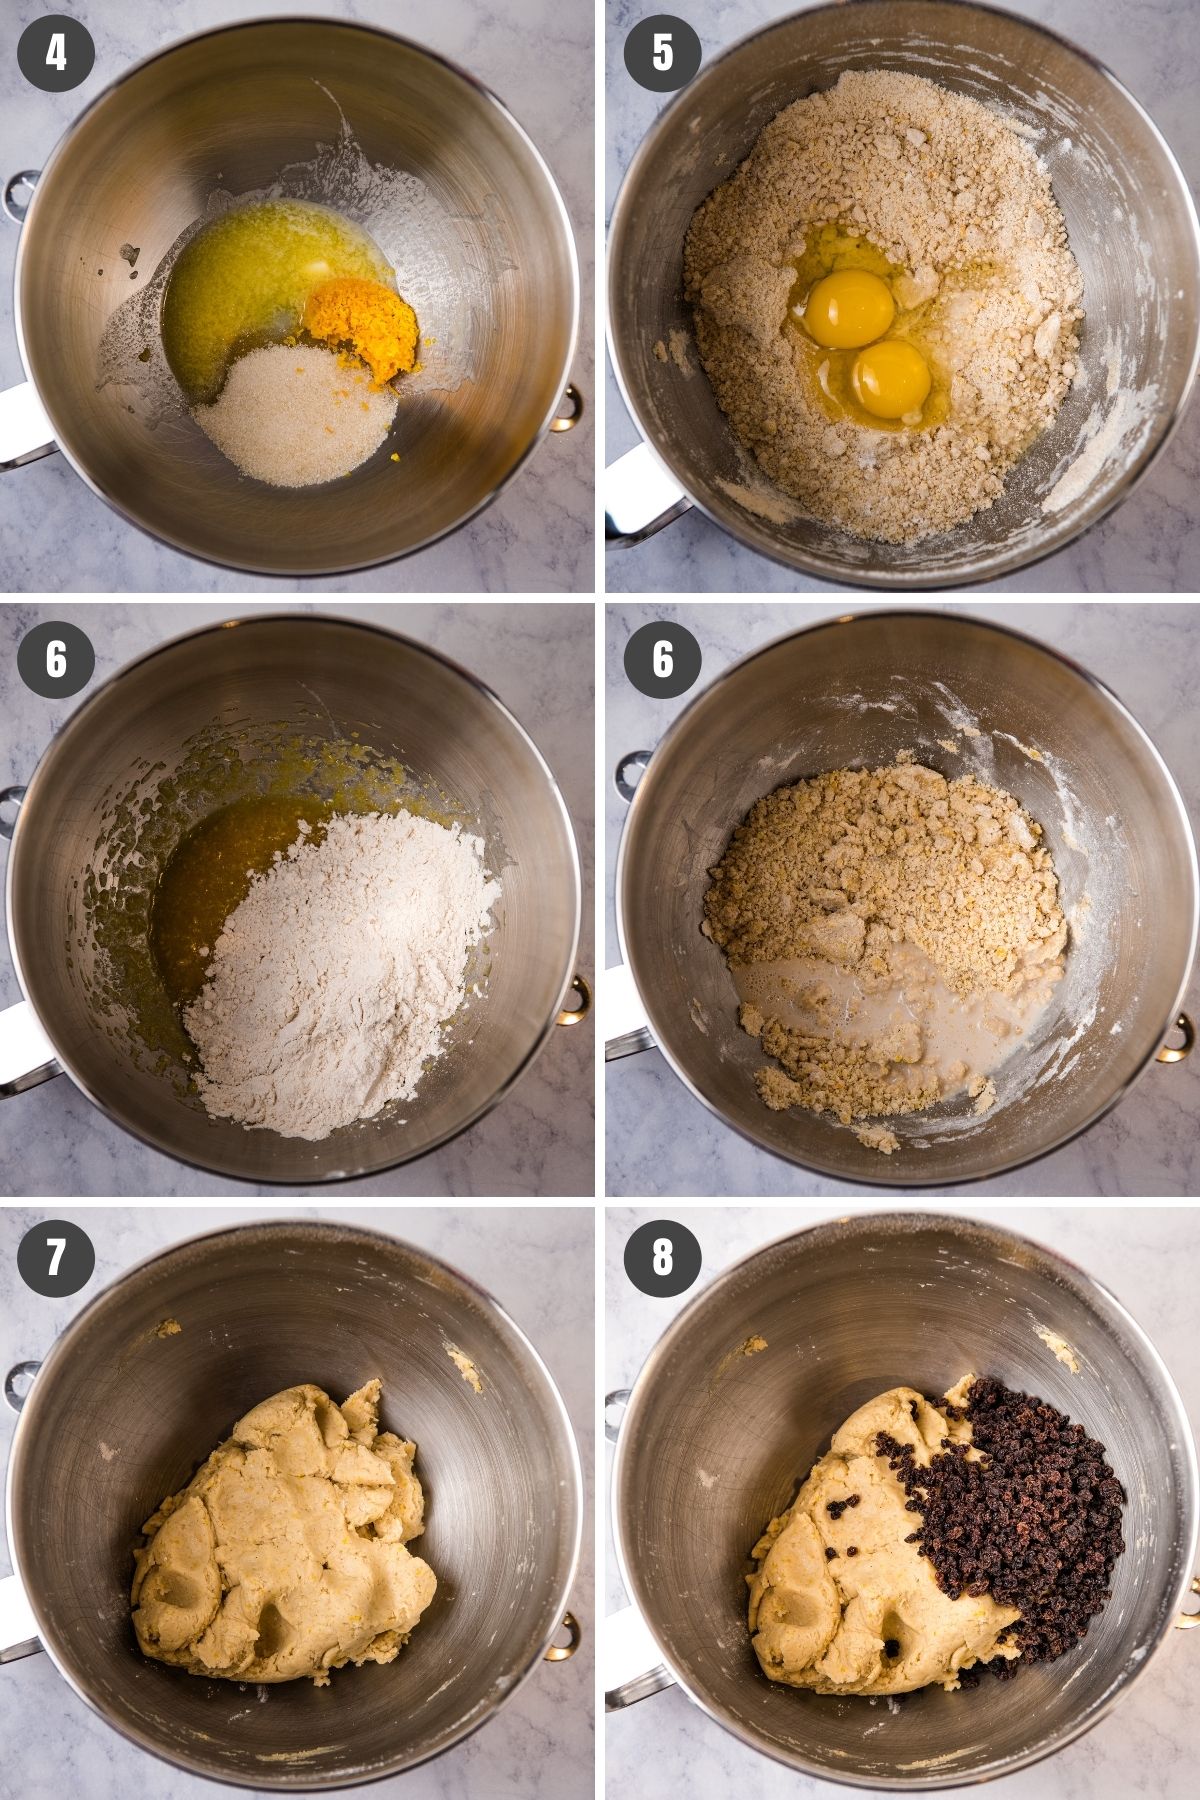 how to make gluten-free hot cross buns, mixing ingredients together in KitchenAid mixing bowl